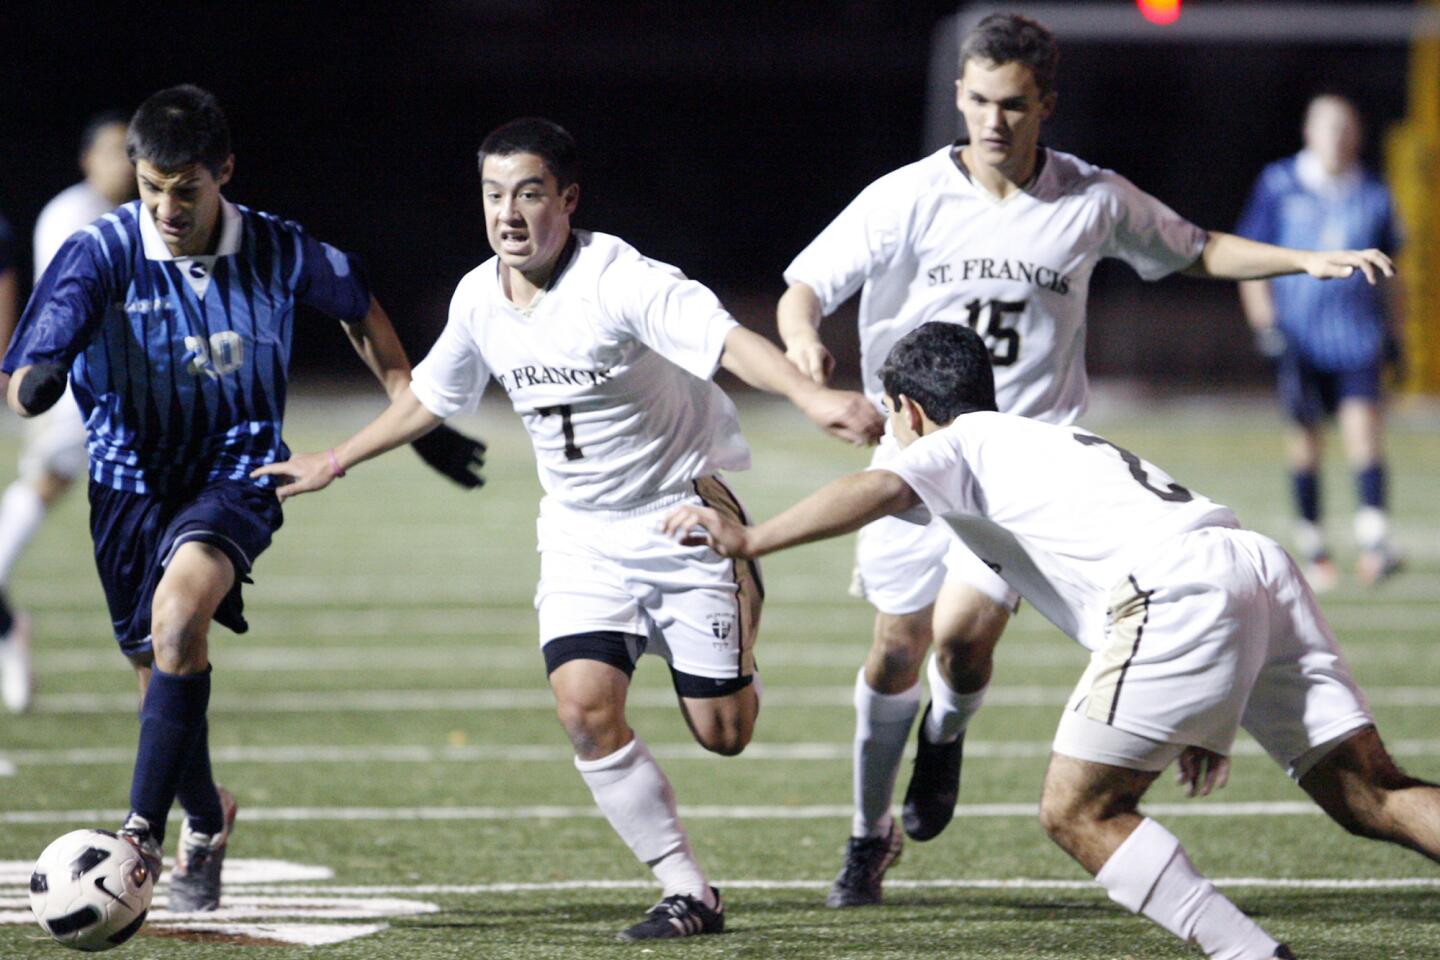 CV's Erick Trejo, from far left, and St. Francis' Derek Bell, fight for the ball during a game at St. Francis High School in La Canada on Saturday, December 3, 2011.